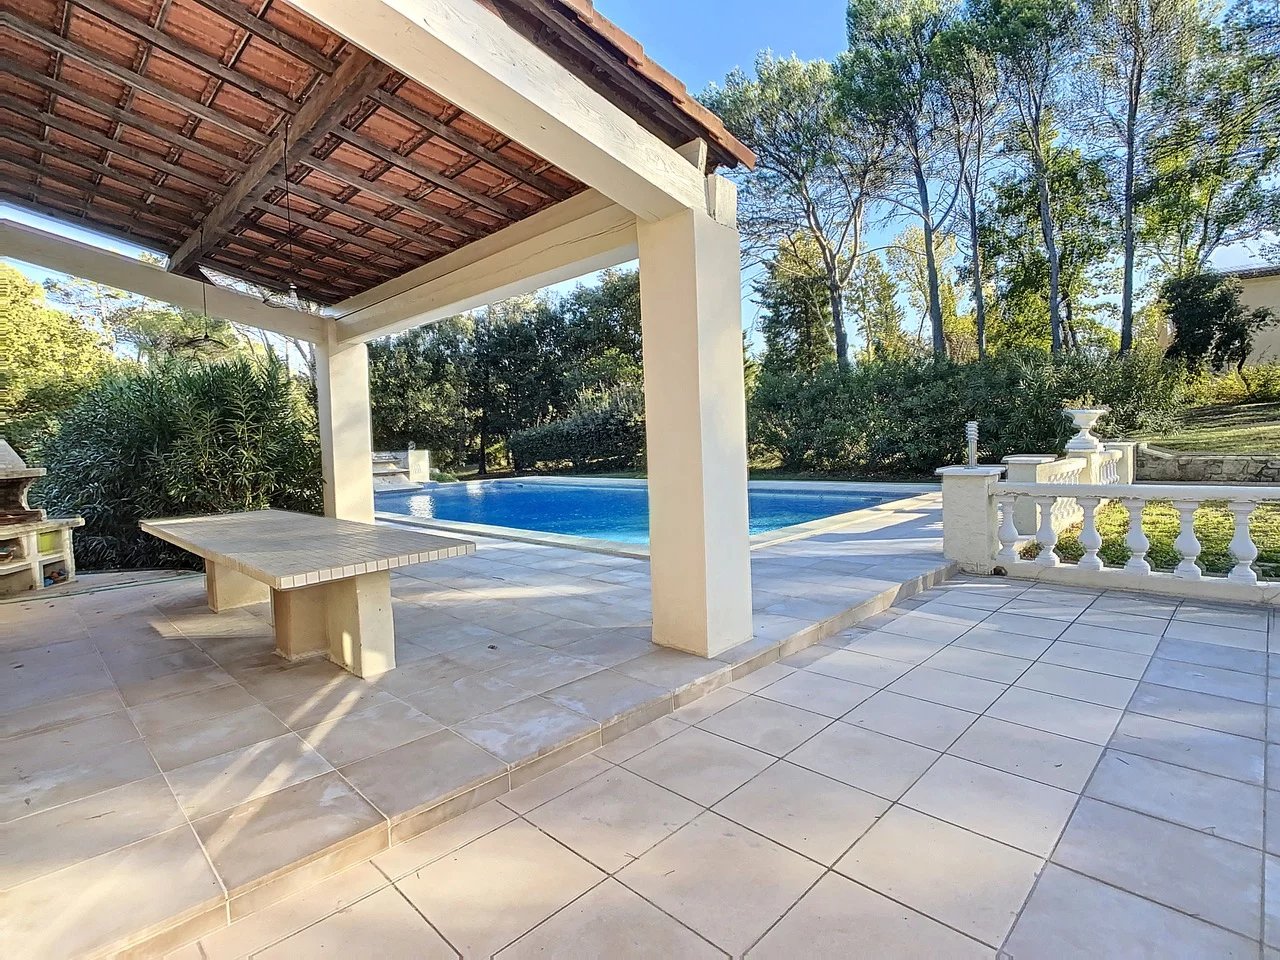 Beautifully renovated villa with large pool on 8,000 m2 plot